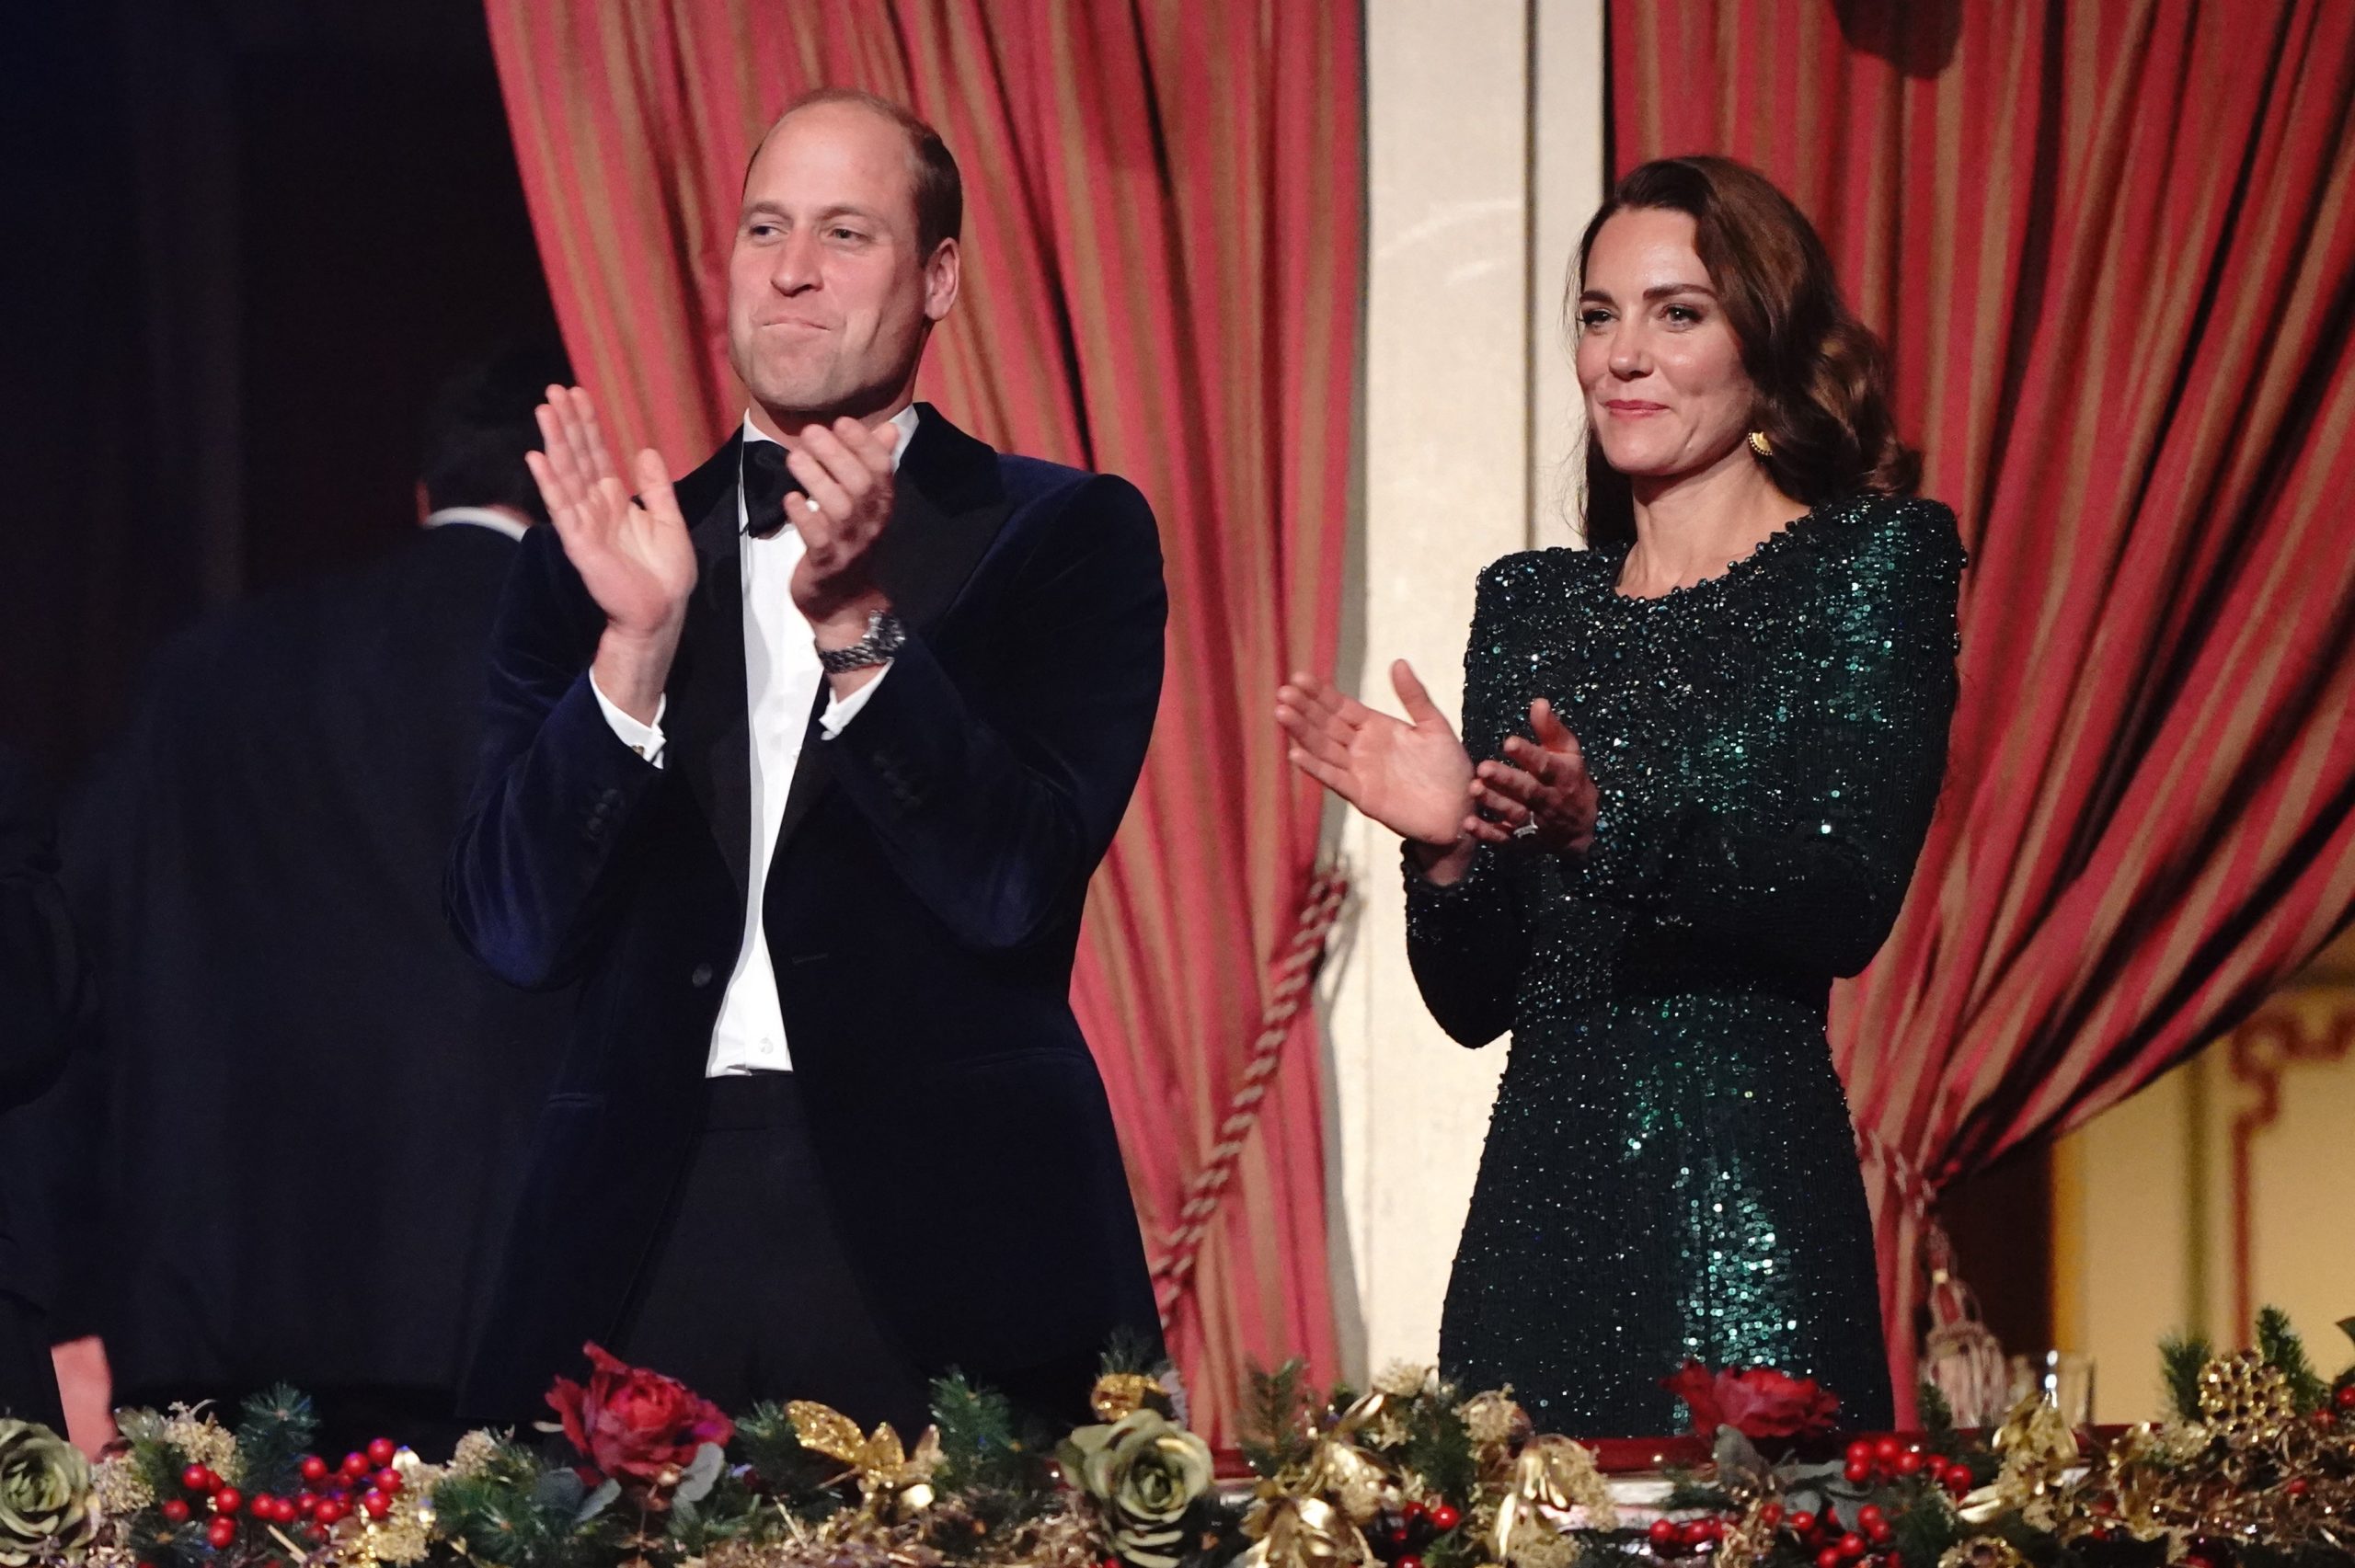 William happy to avoid being target of jokes during Royal Variety Performance